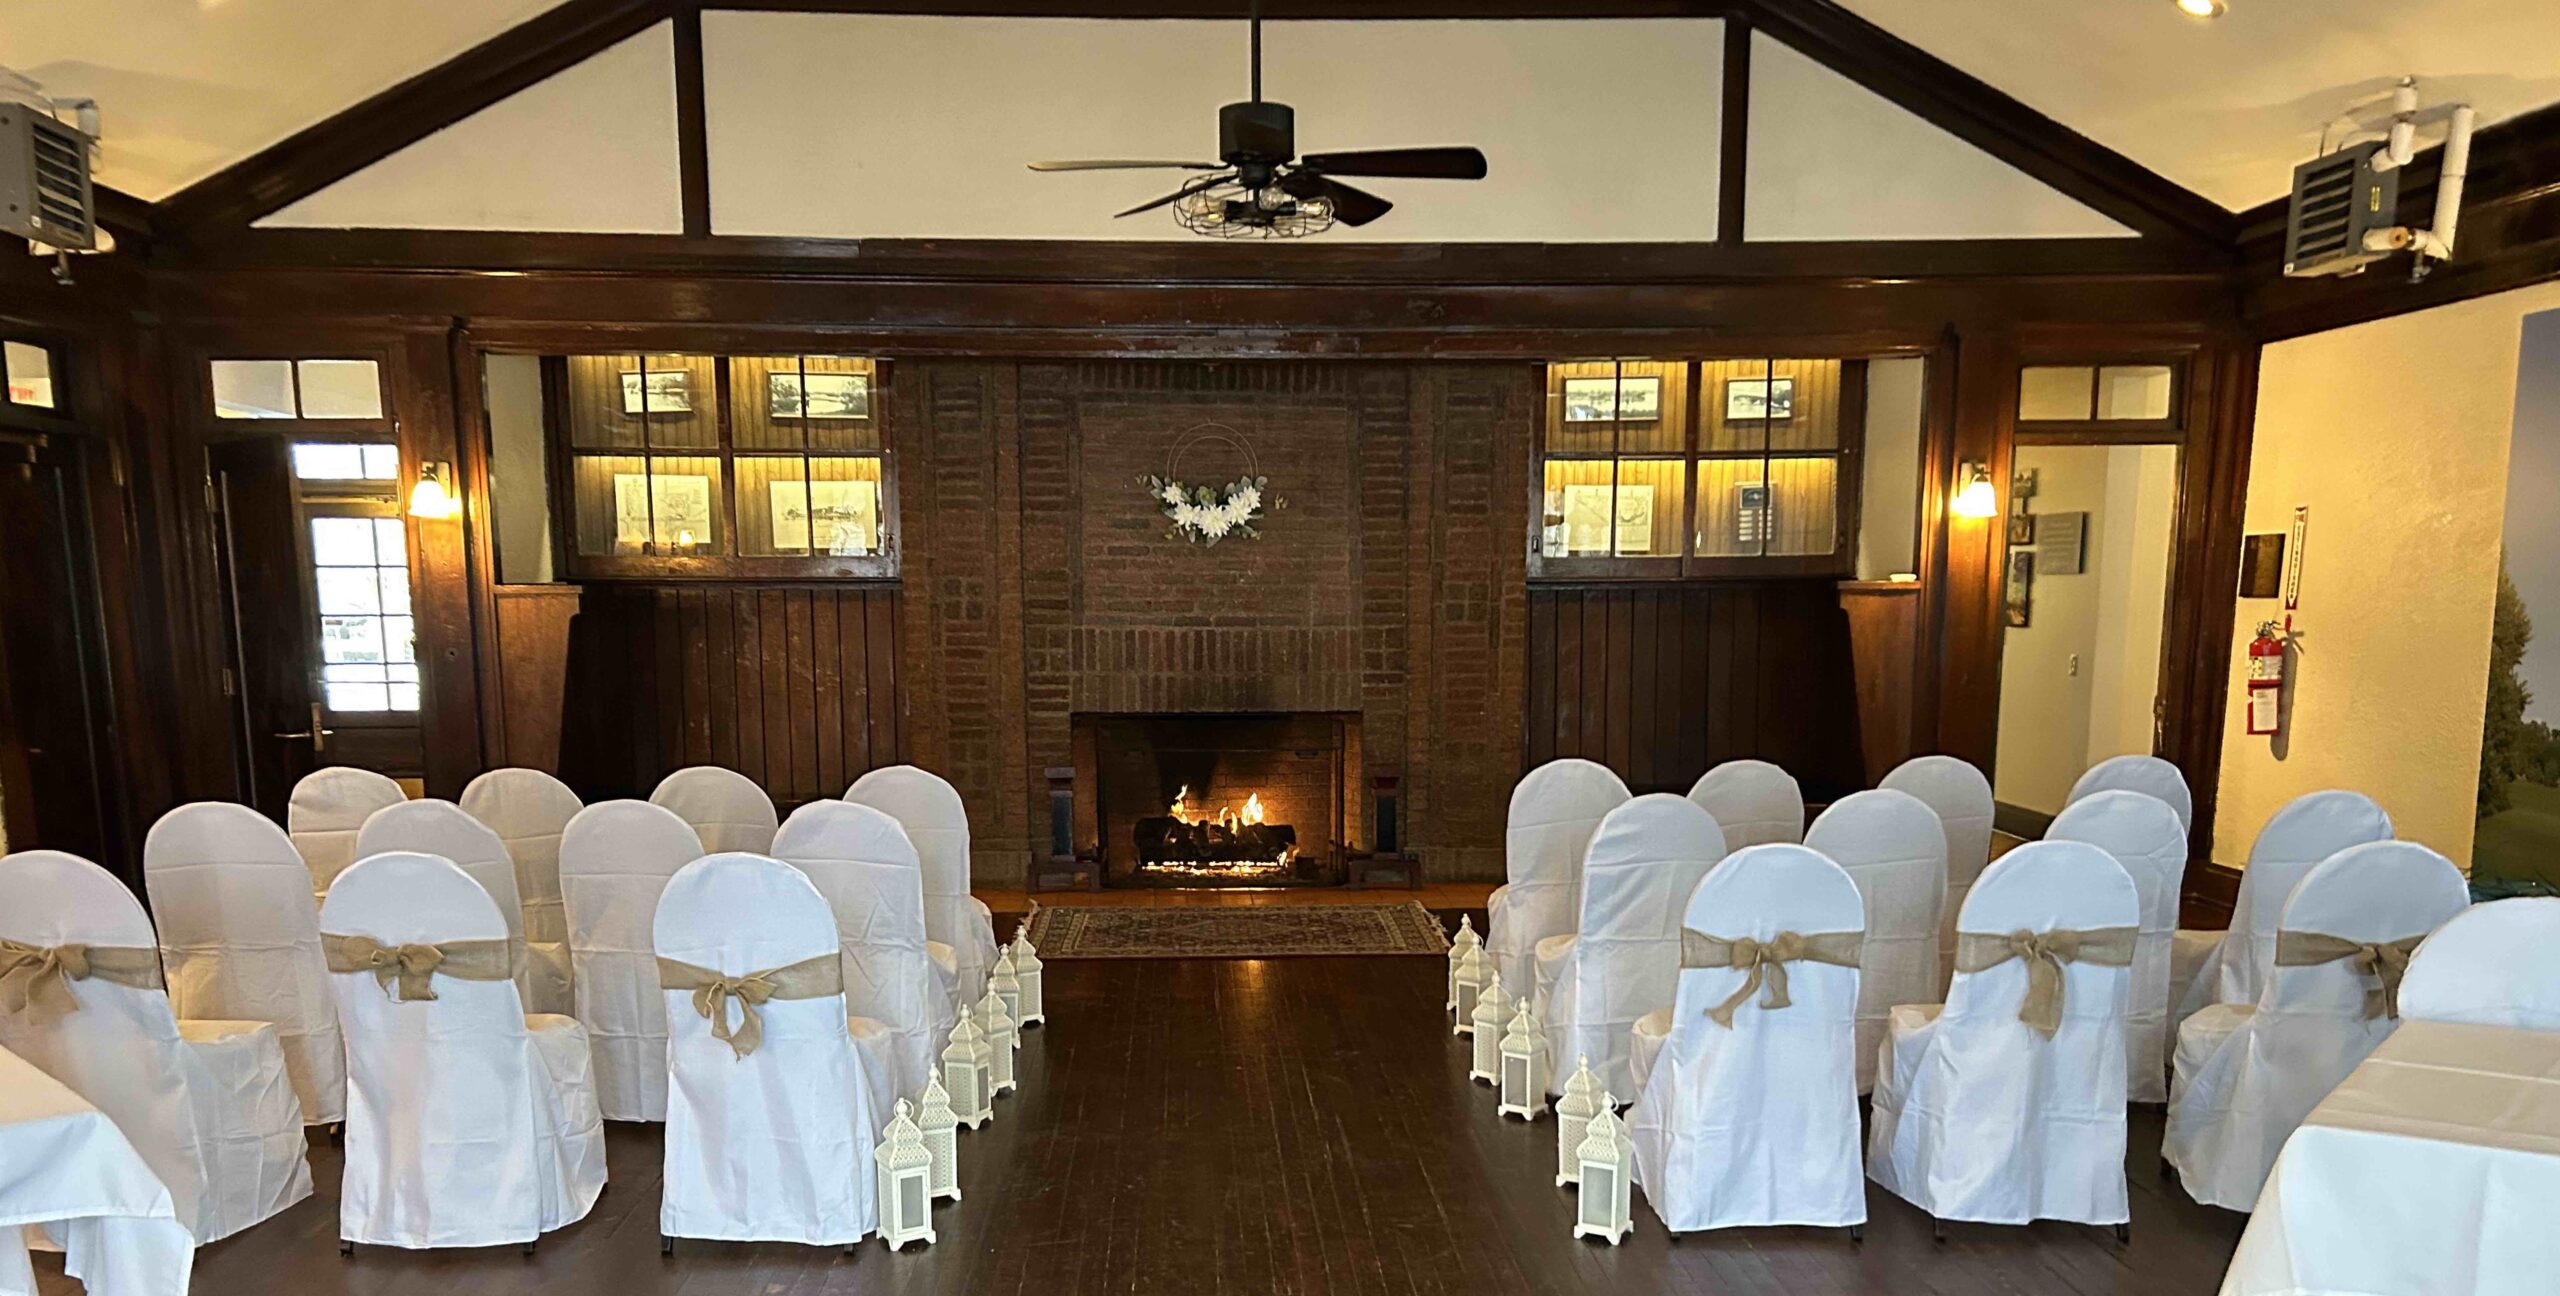 Chairs in white linen for a wedding ceremony at the Parkside Lodge